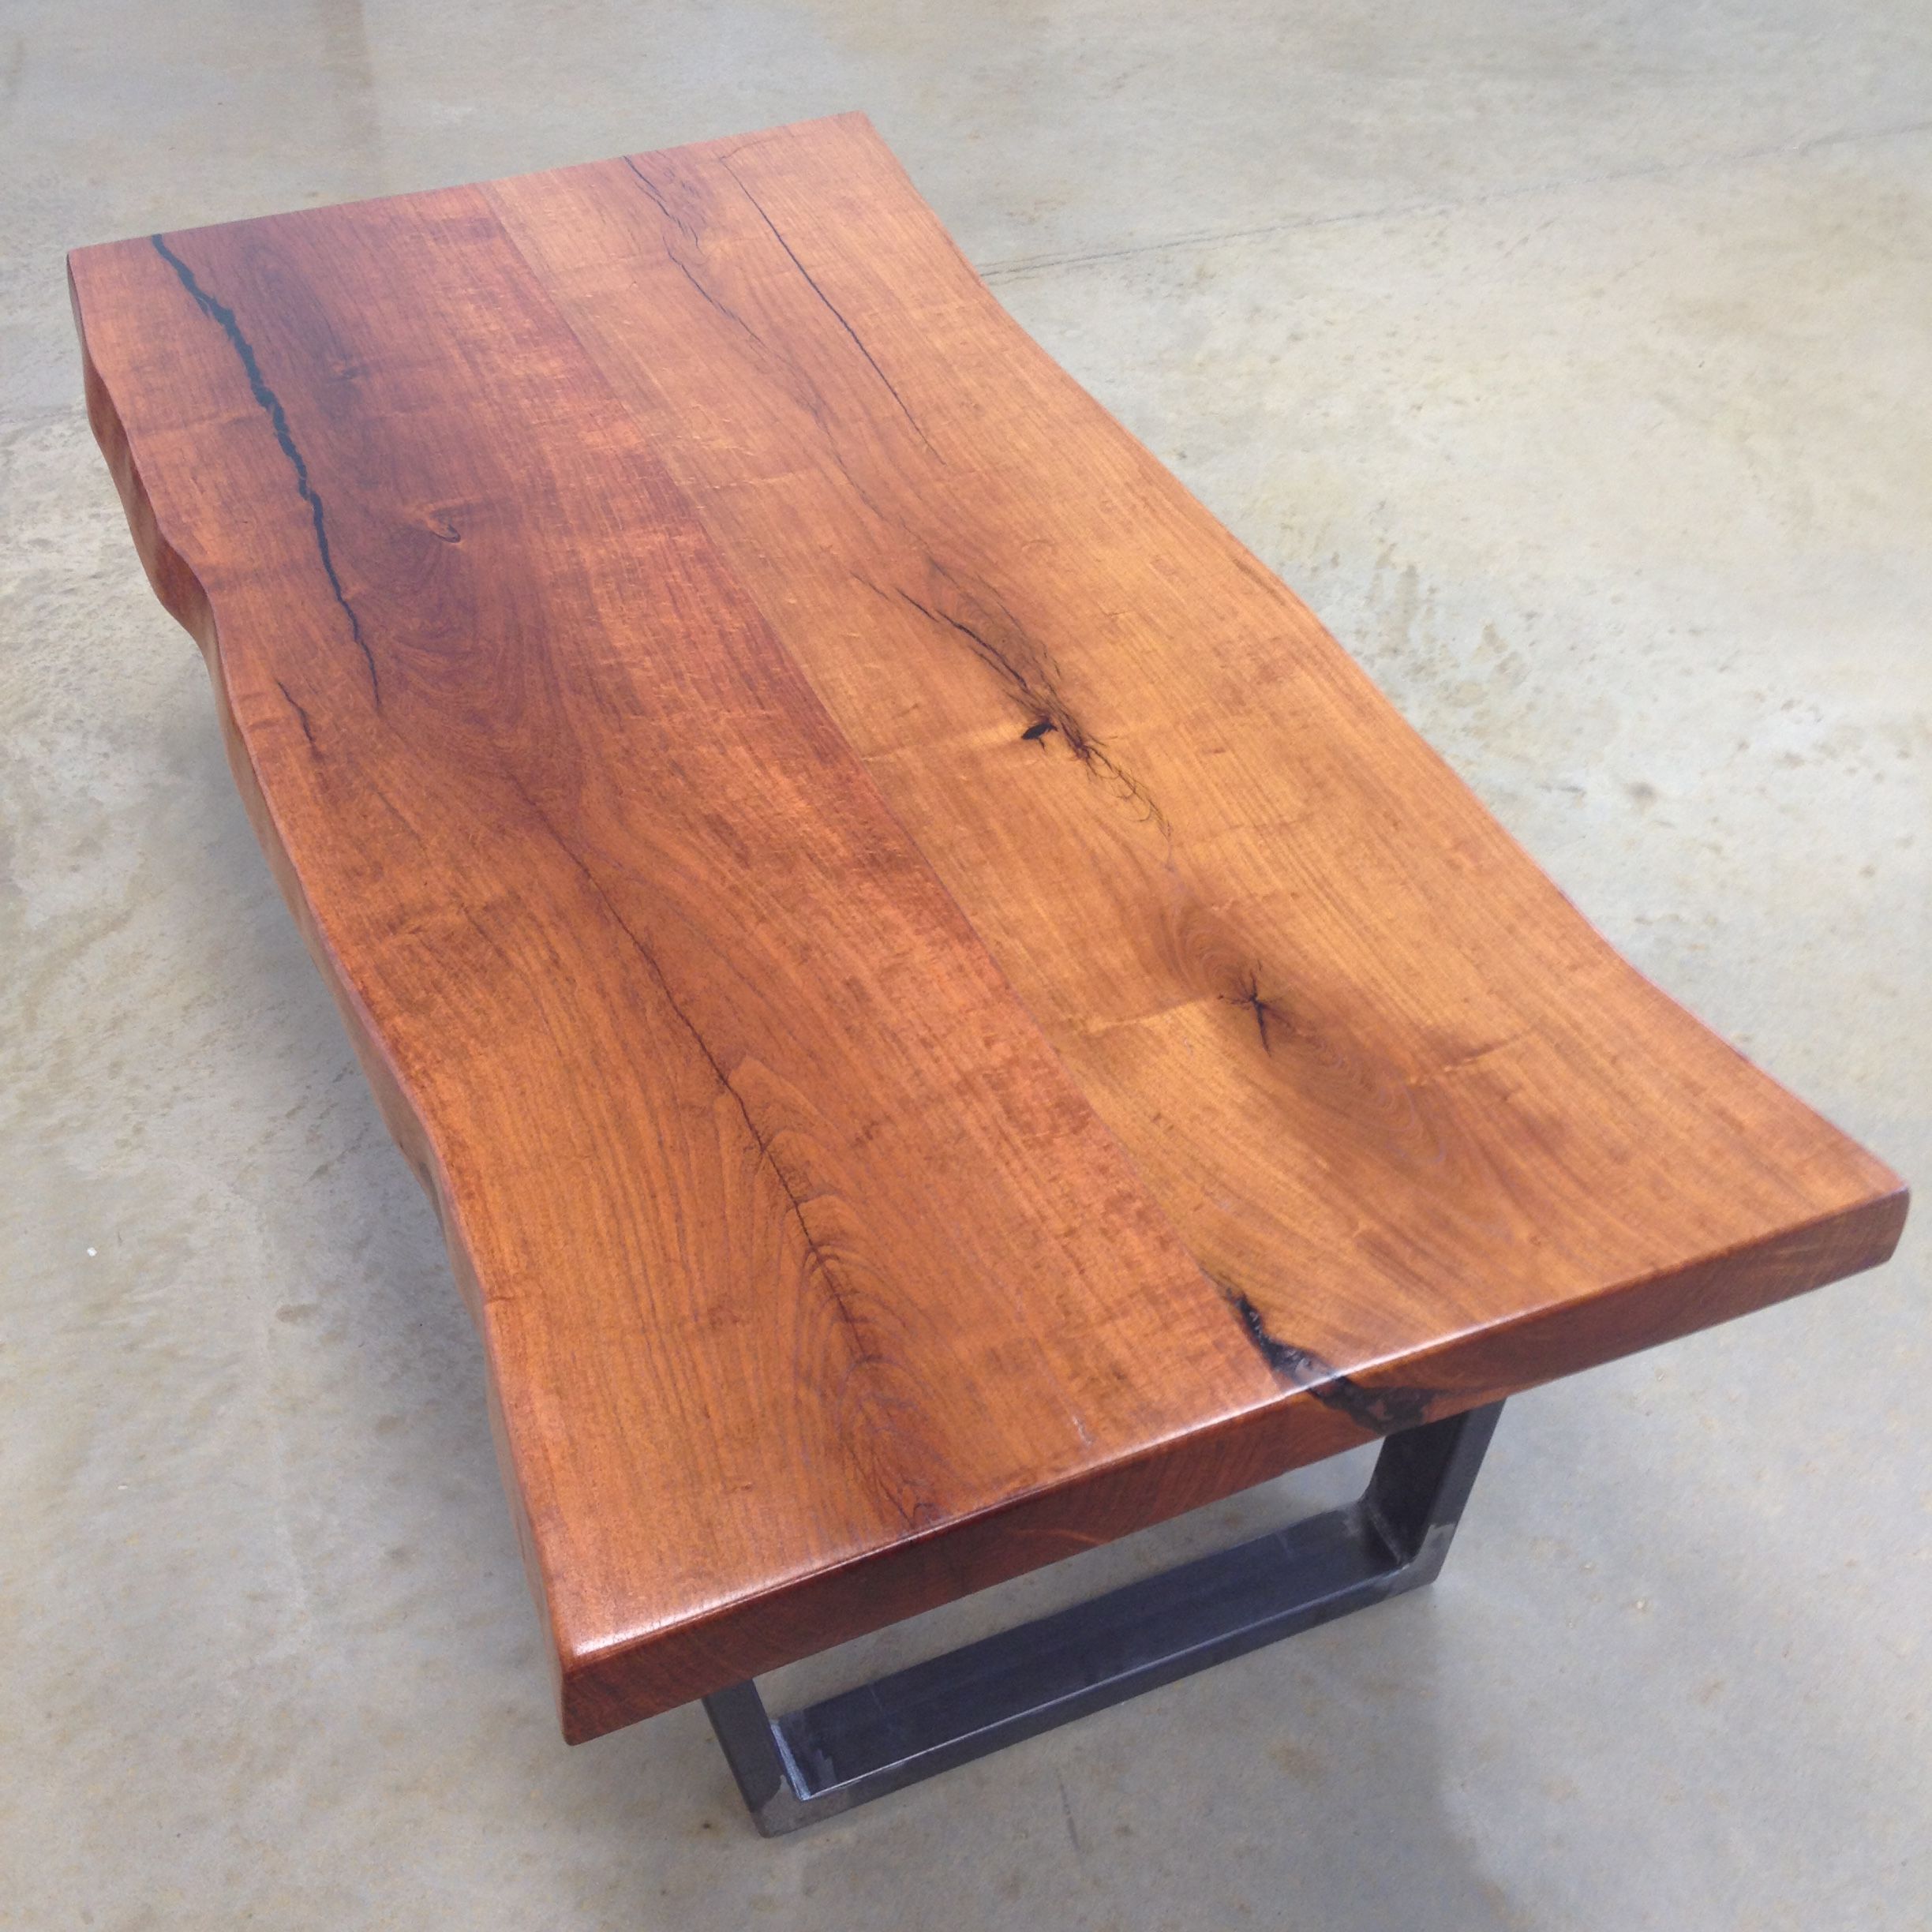 Buy A Hand Crafted Mesquite Coffee Table With Boatman Base Made